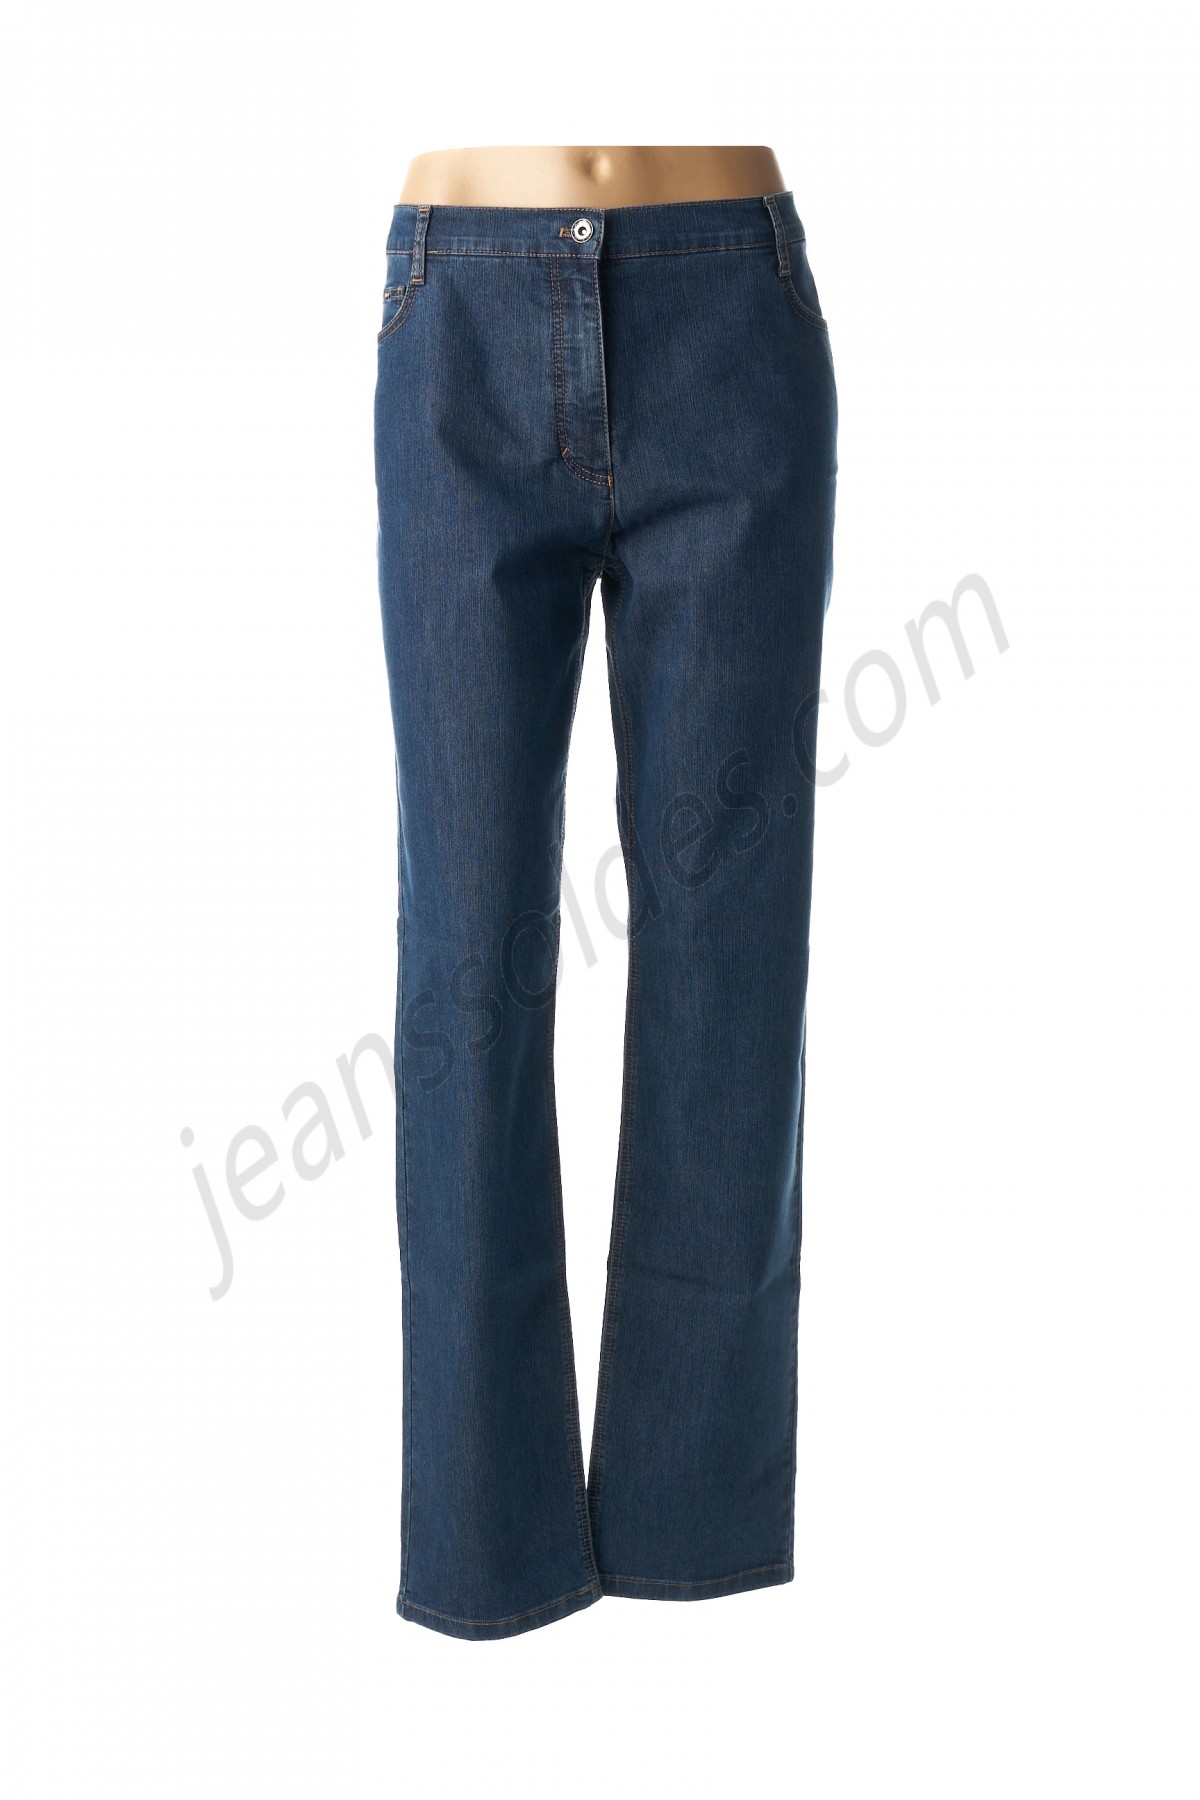 betty barclay-Jeans coupe droite prix d’amis - -0